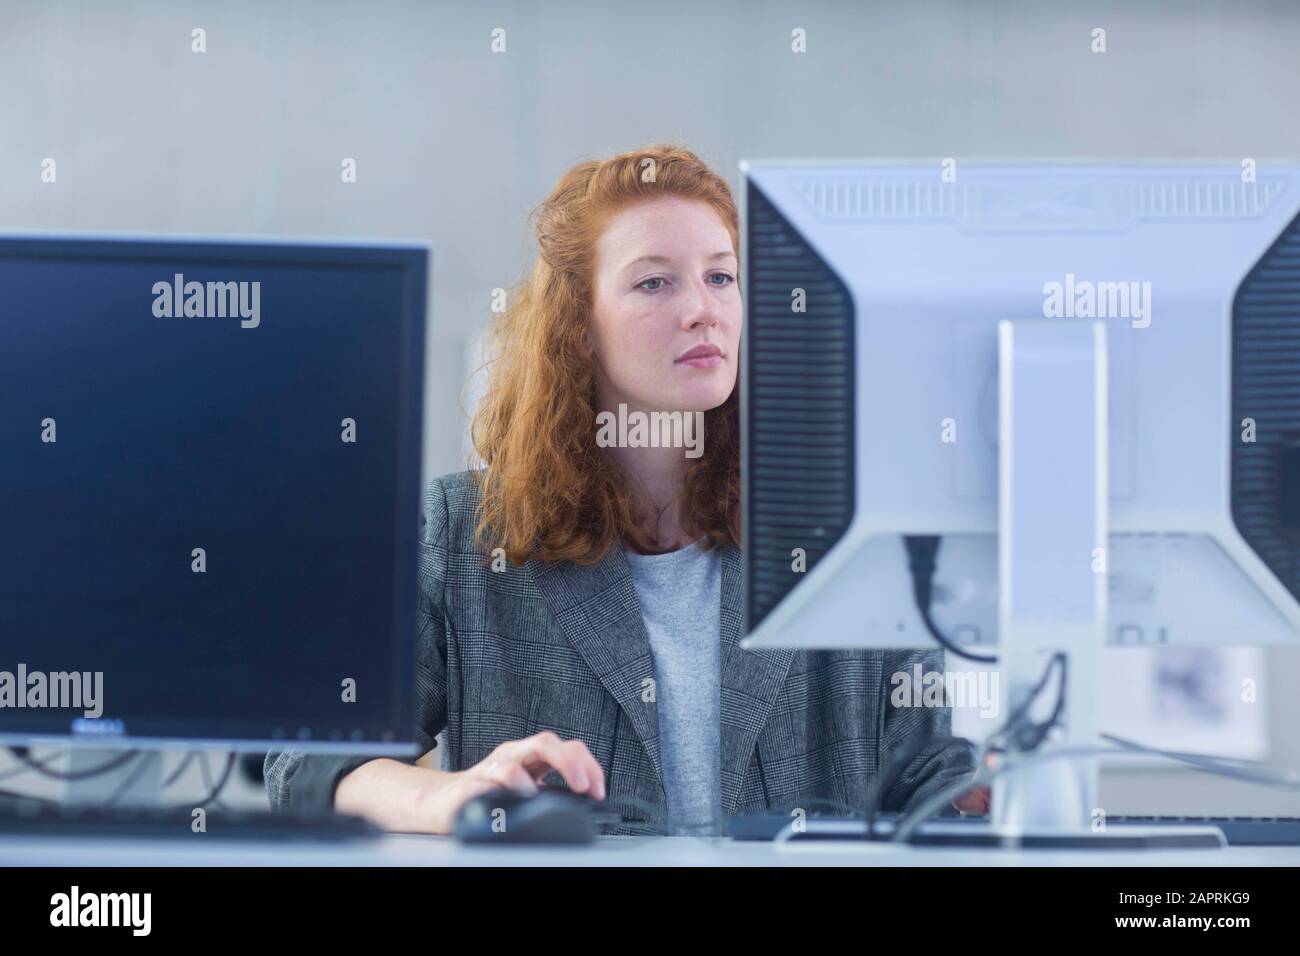 employee in an office concentrate Stock Photo